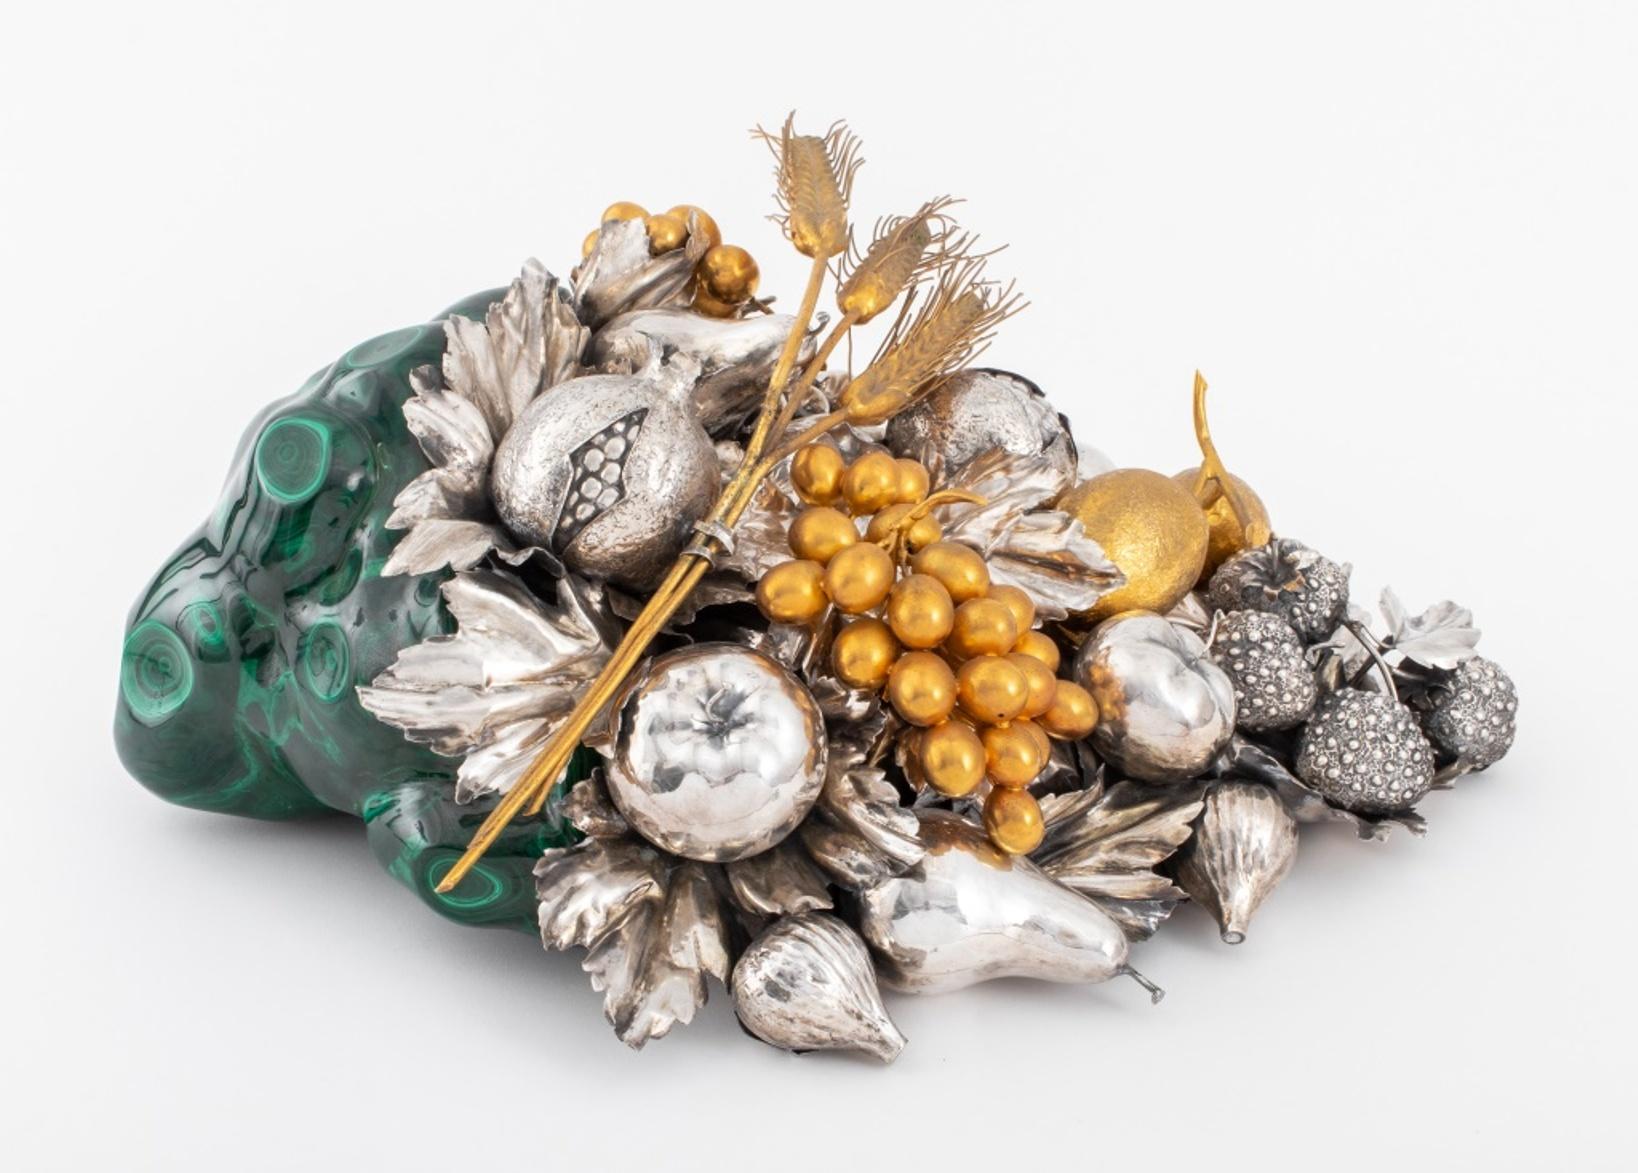 Gianmaria Buccellati (Italian, 1929-2015) silver and malachite centerpiece, in the form of a cornucopia issuing harvest fruits, the whole with leaves, grape clusters, pears, apples, pomegranates, figs, lemons, and strawberries with wheat sheaves,